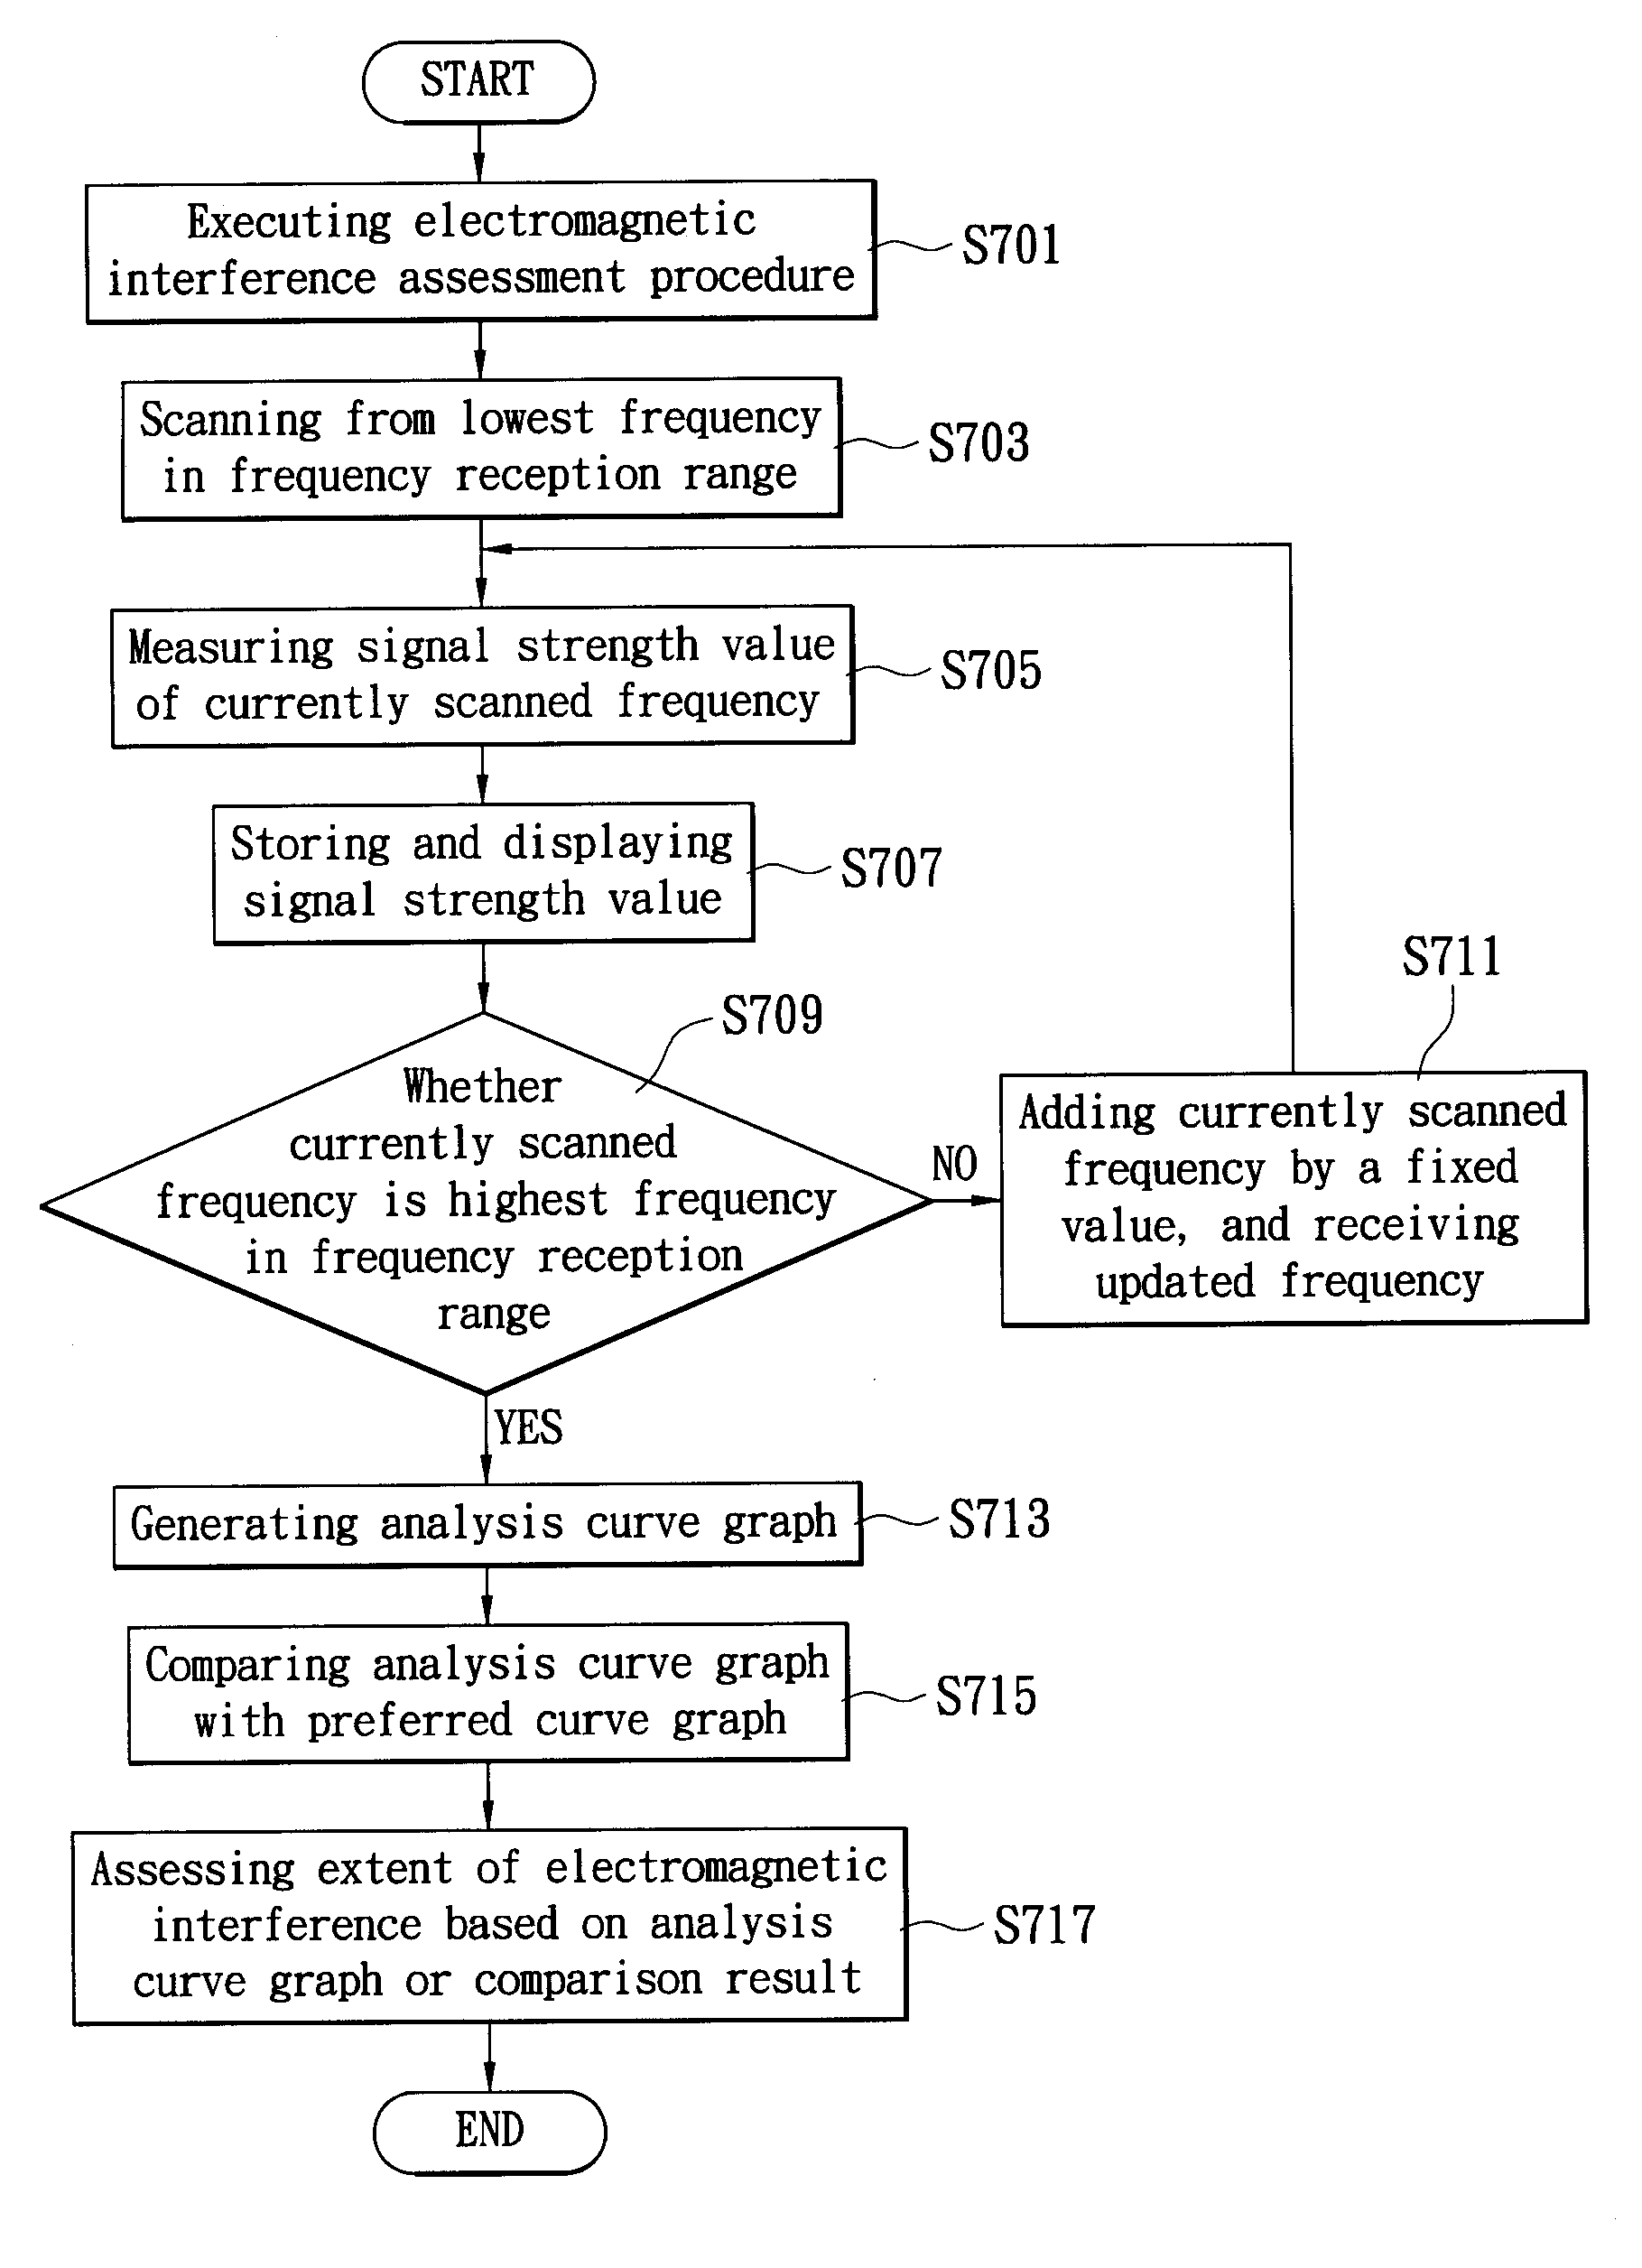 Method of electromagnetic interference assessment